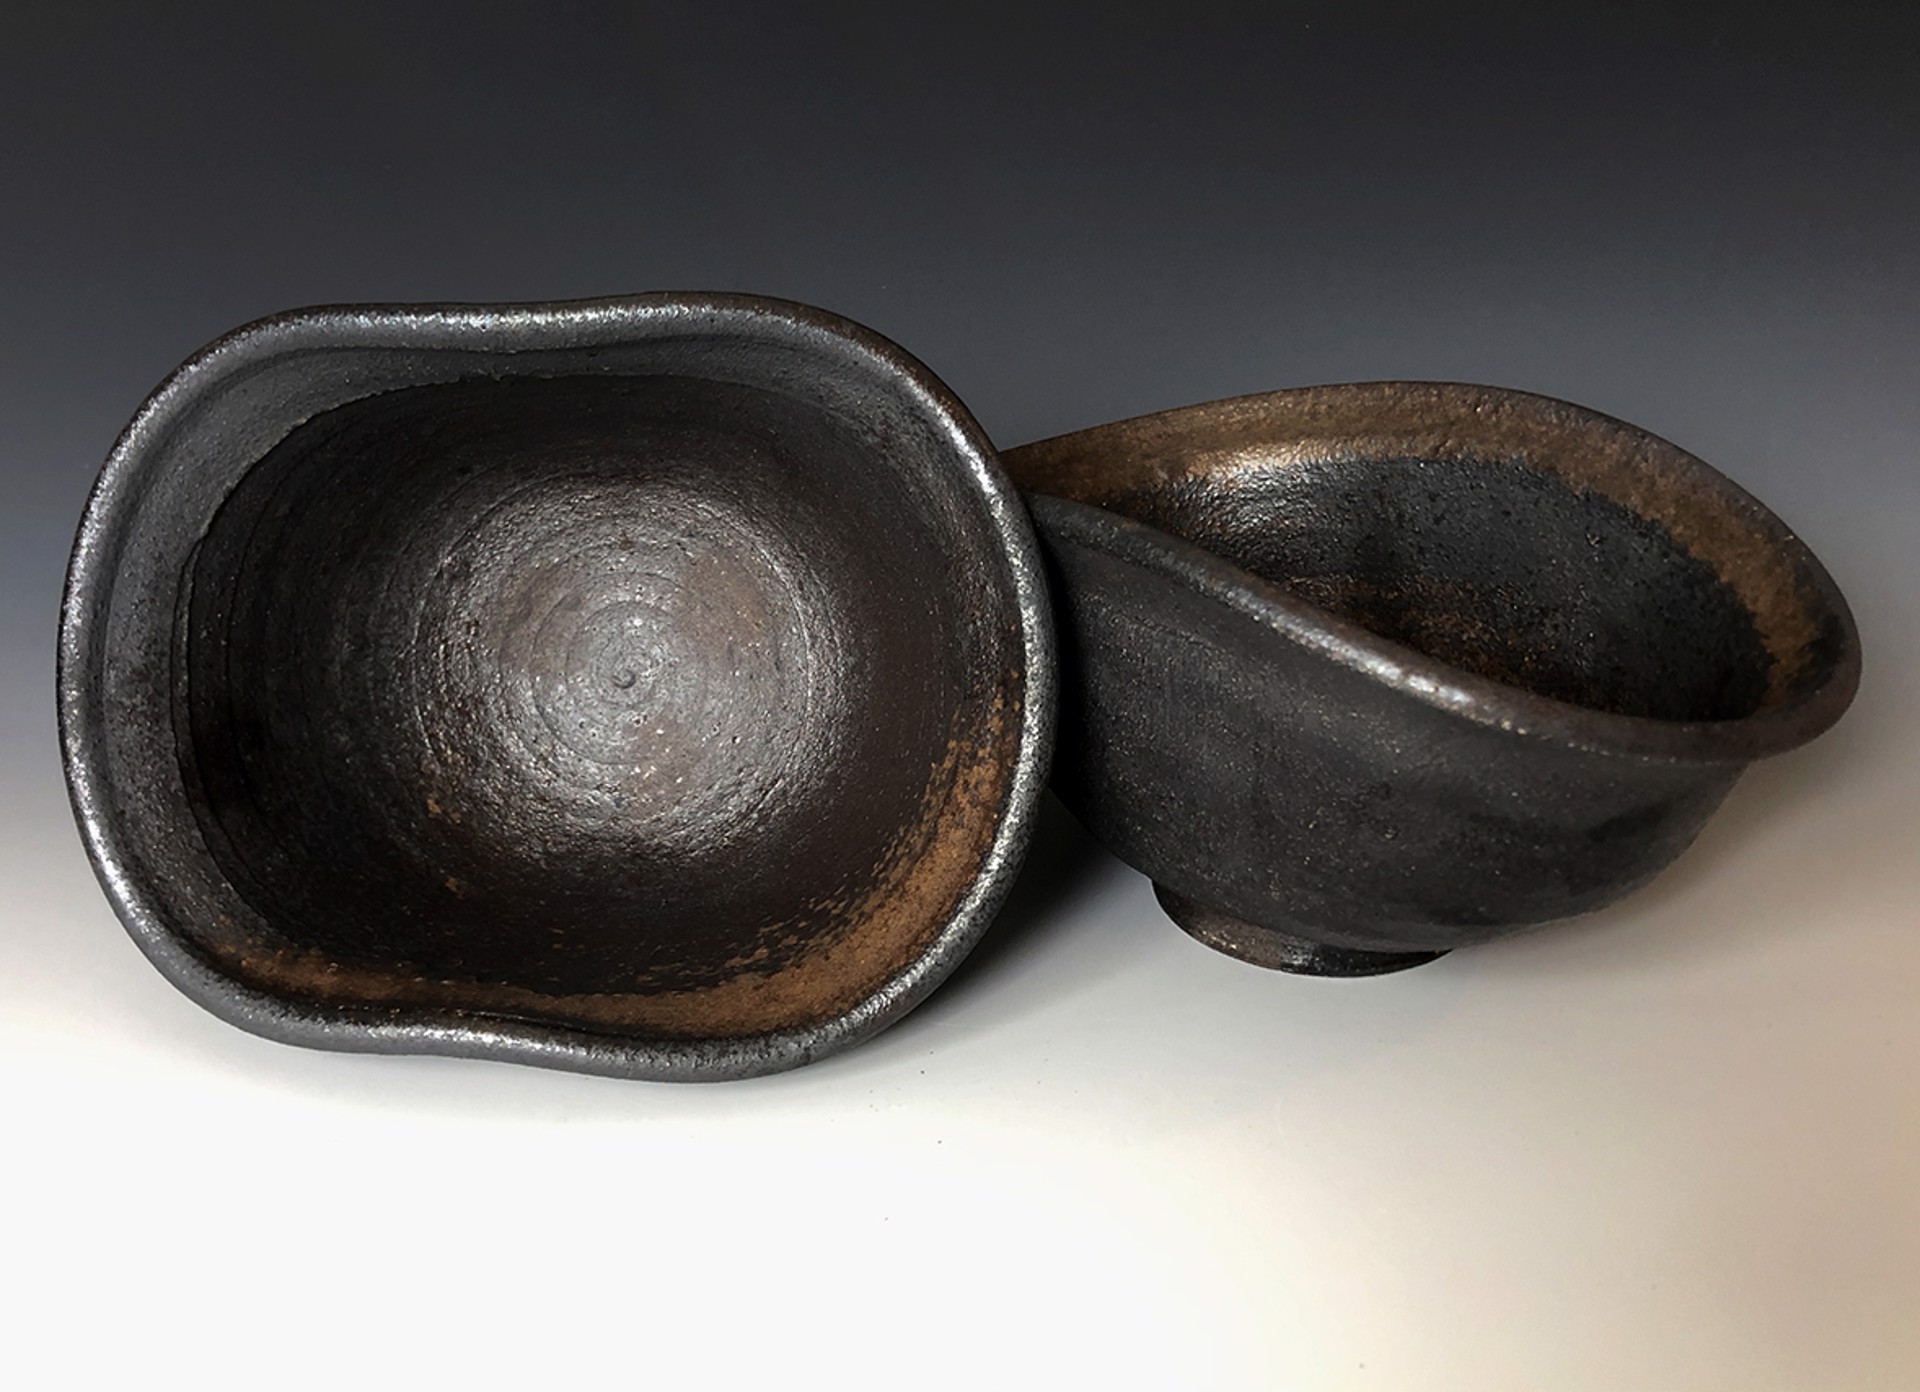 Black Cowboy Bowl (right in image) by Dom Venzant